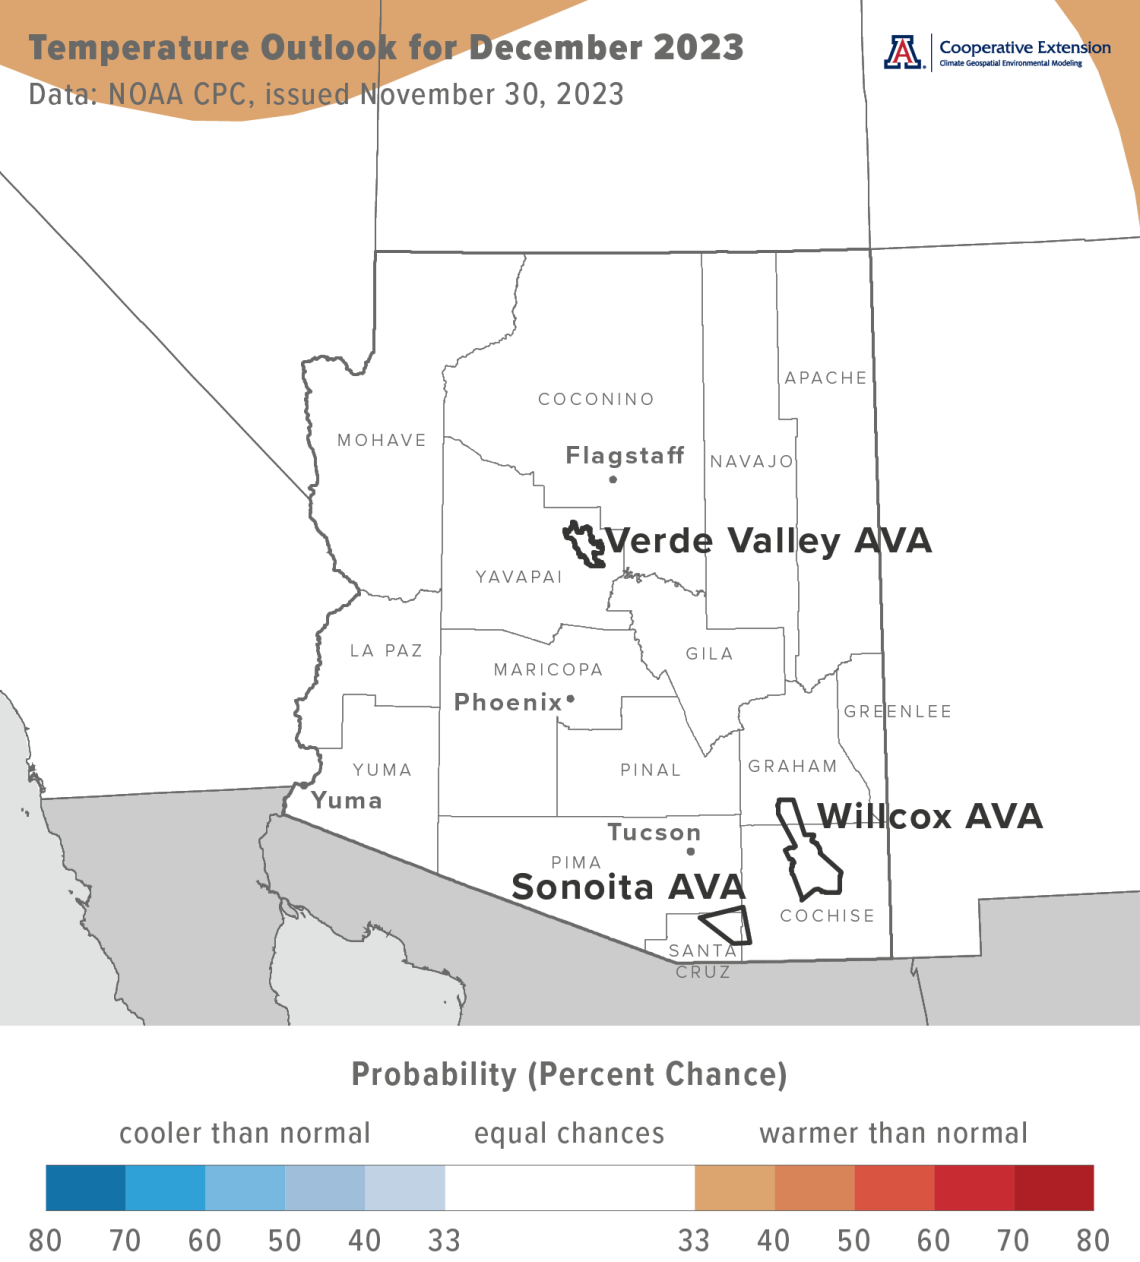 December 2023 temperature outlook map for Arizona